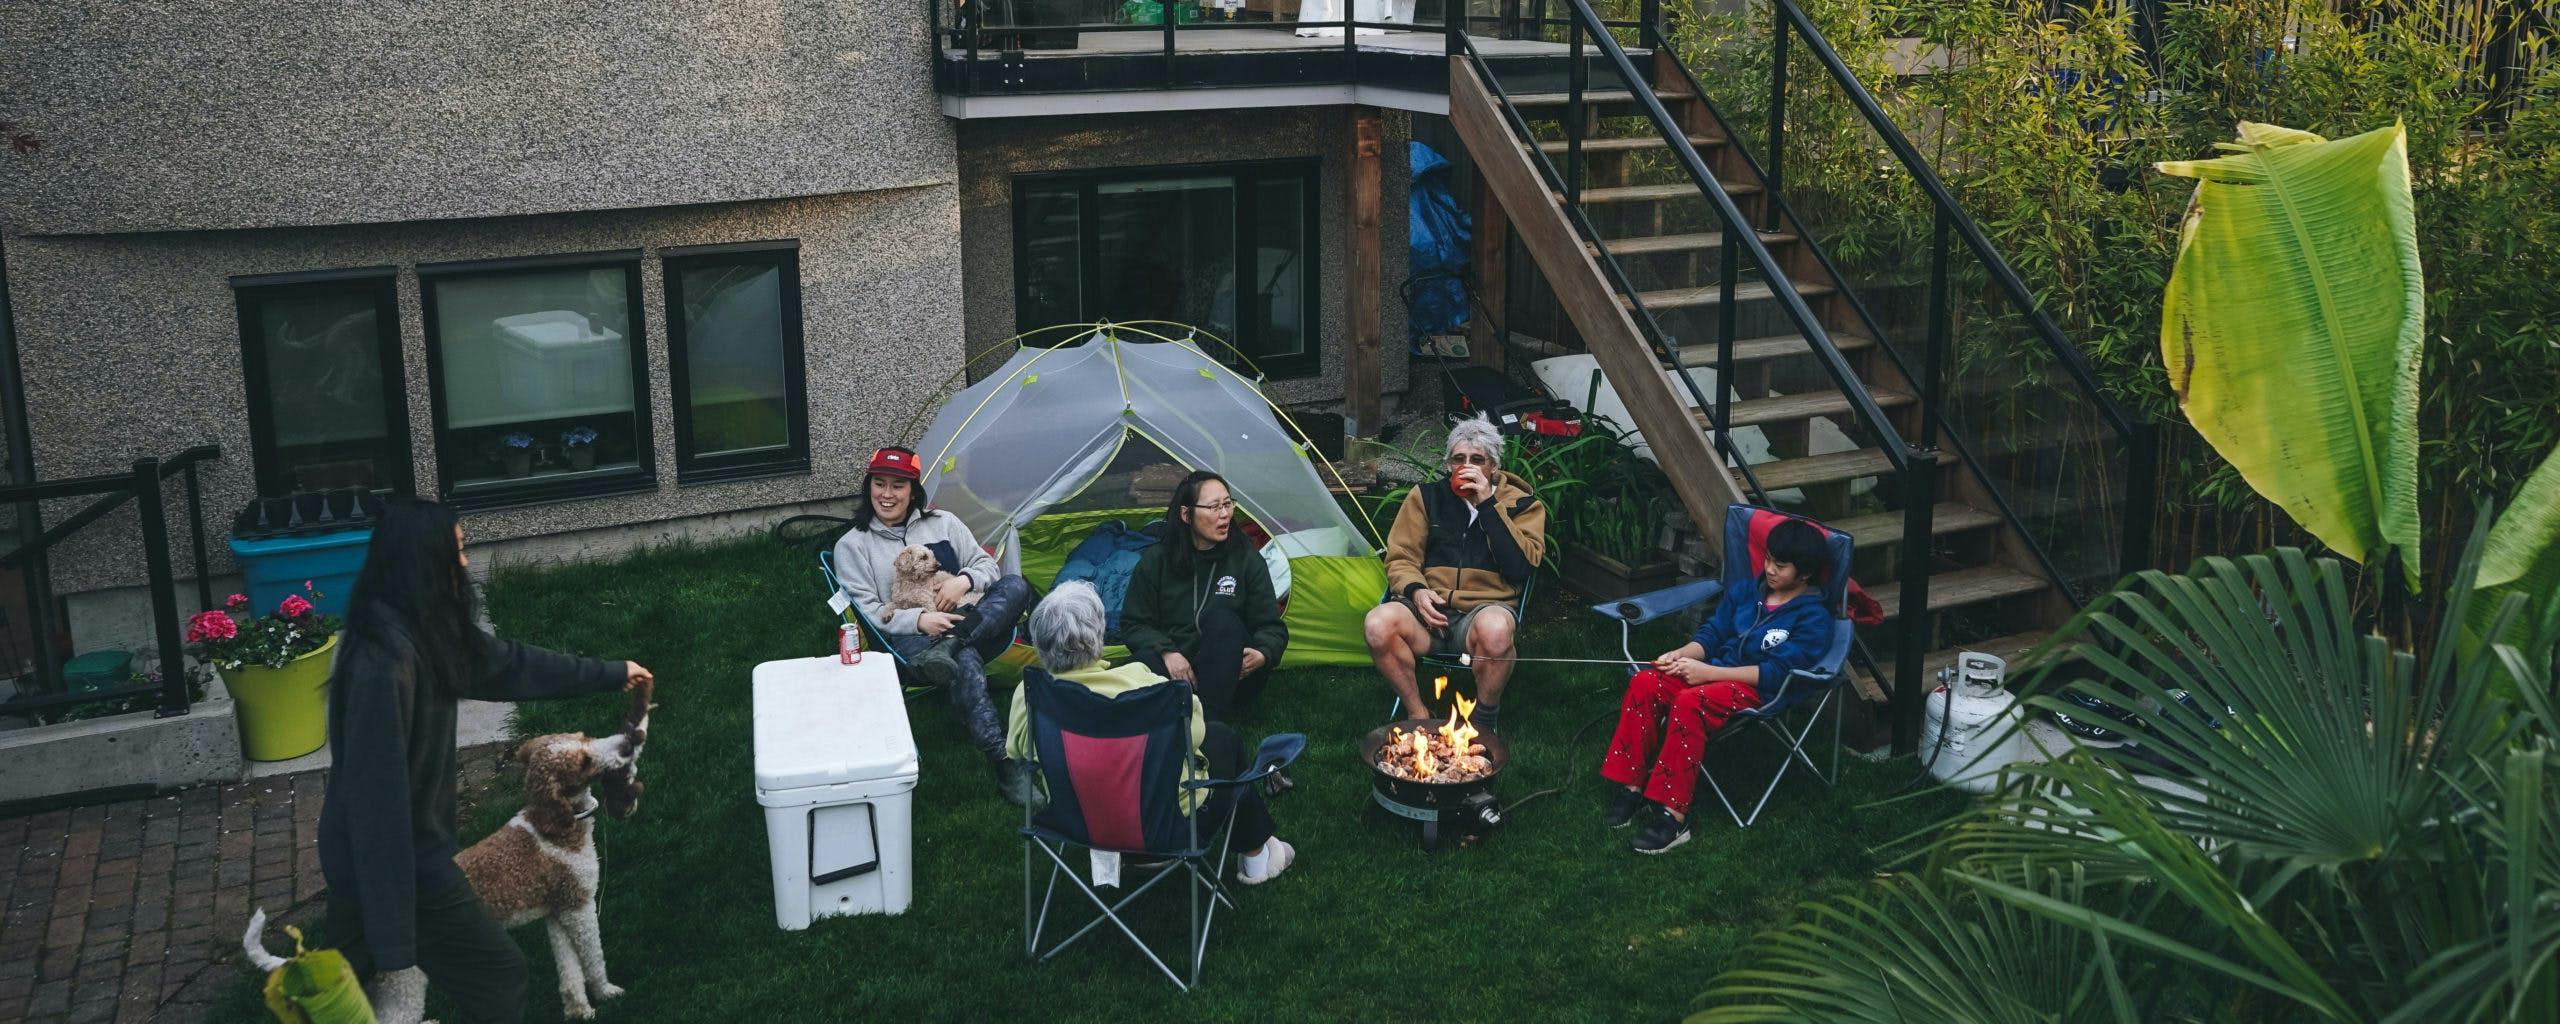 How to create the ultimate campout at home